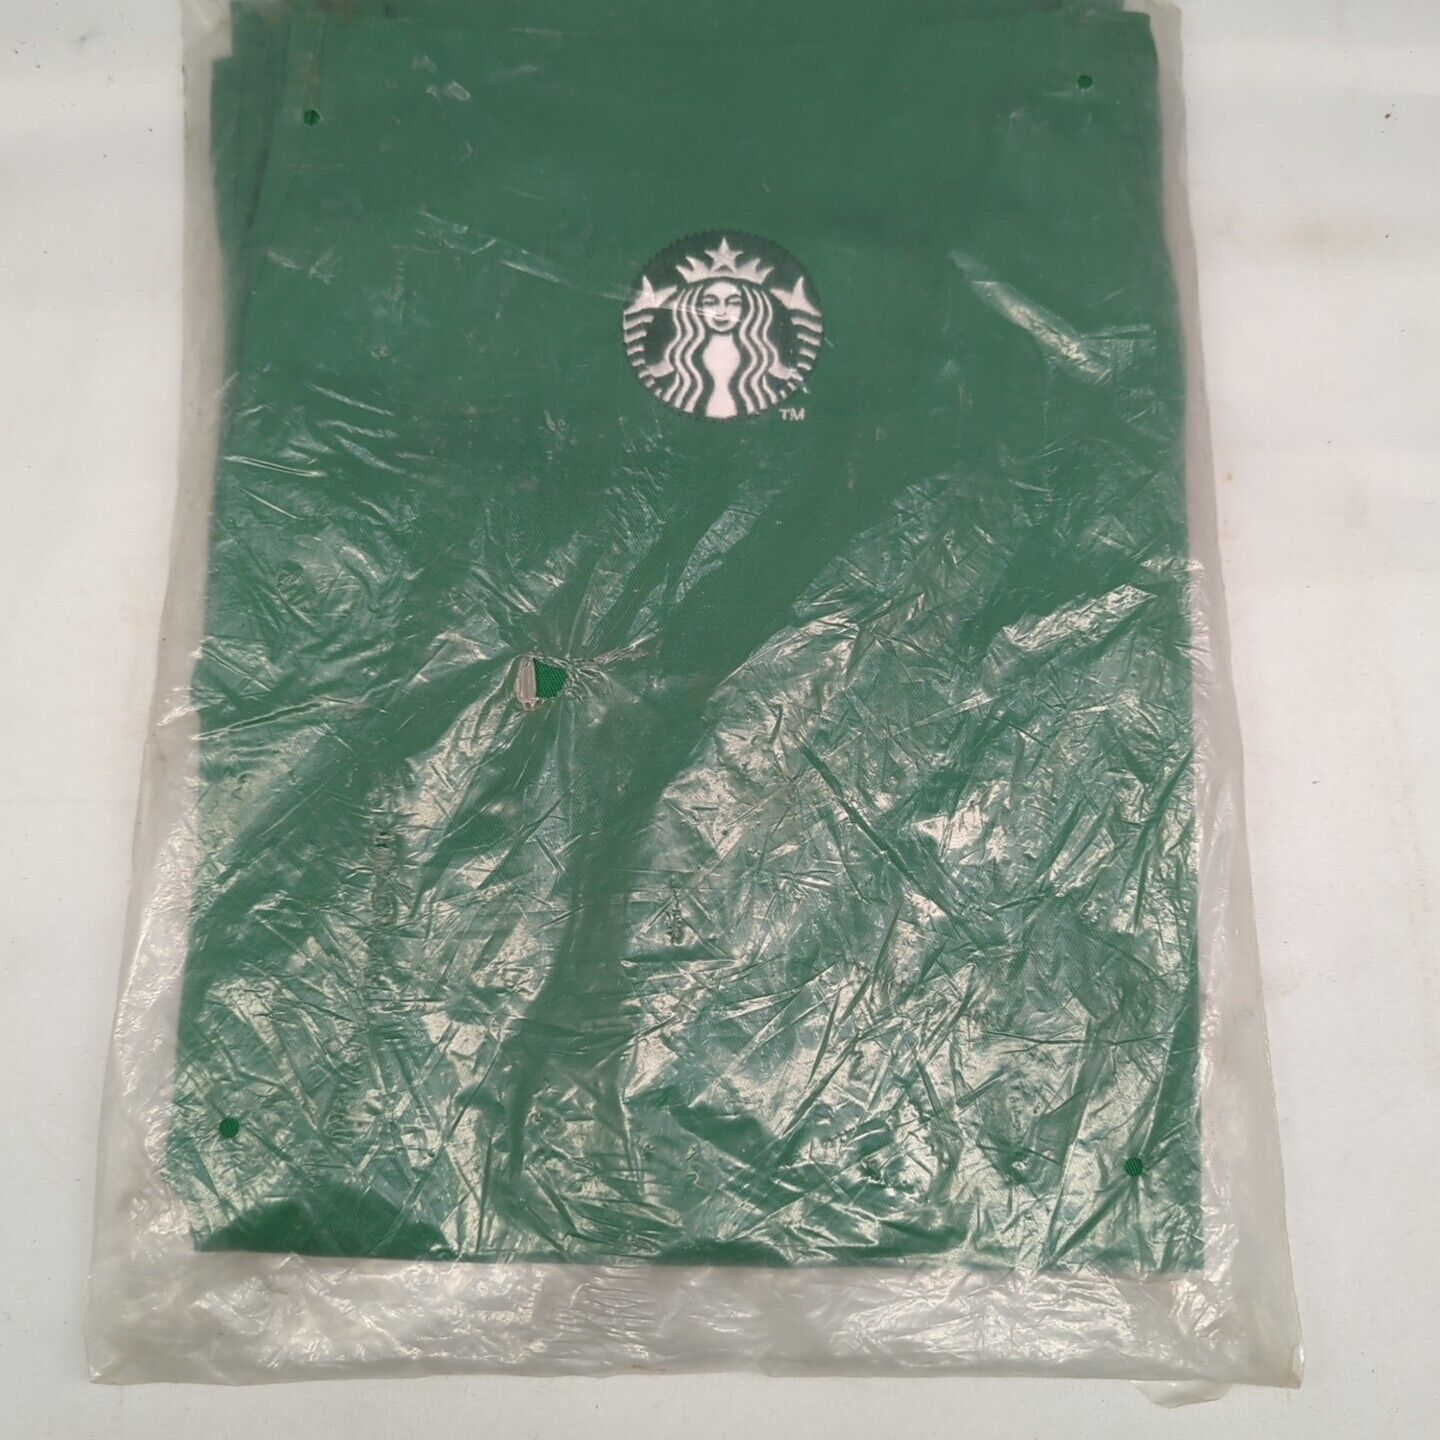 Starbucks Coffee Official Barista Green Apron Brand New Sealed